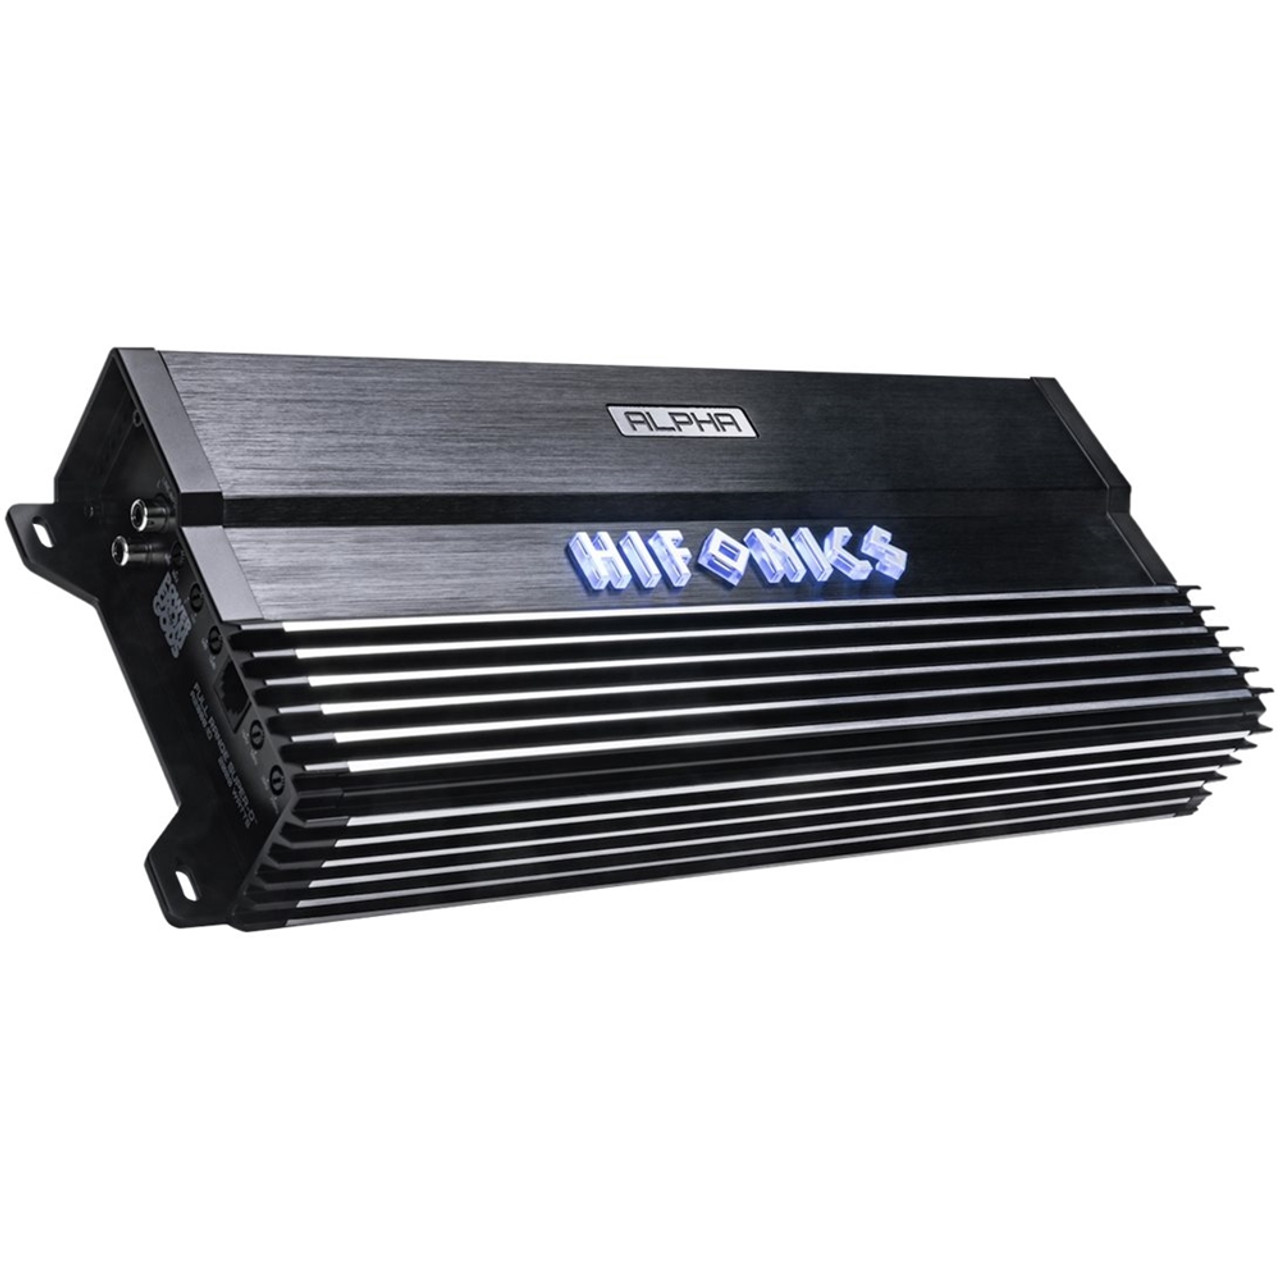 Hifonics - ALPHA 2000W Class D Digital Mono Amplifier with Variable Low-Pass Crossover - Black